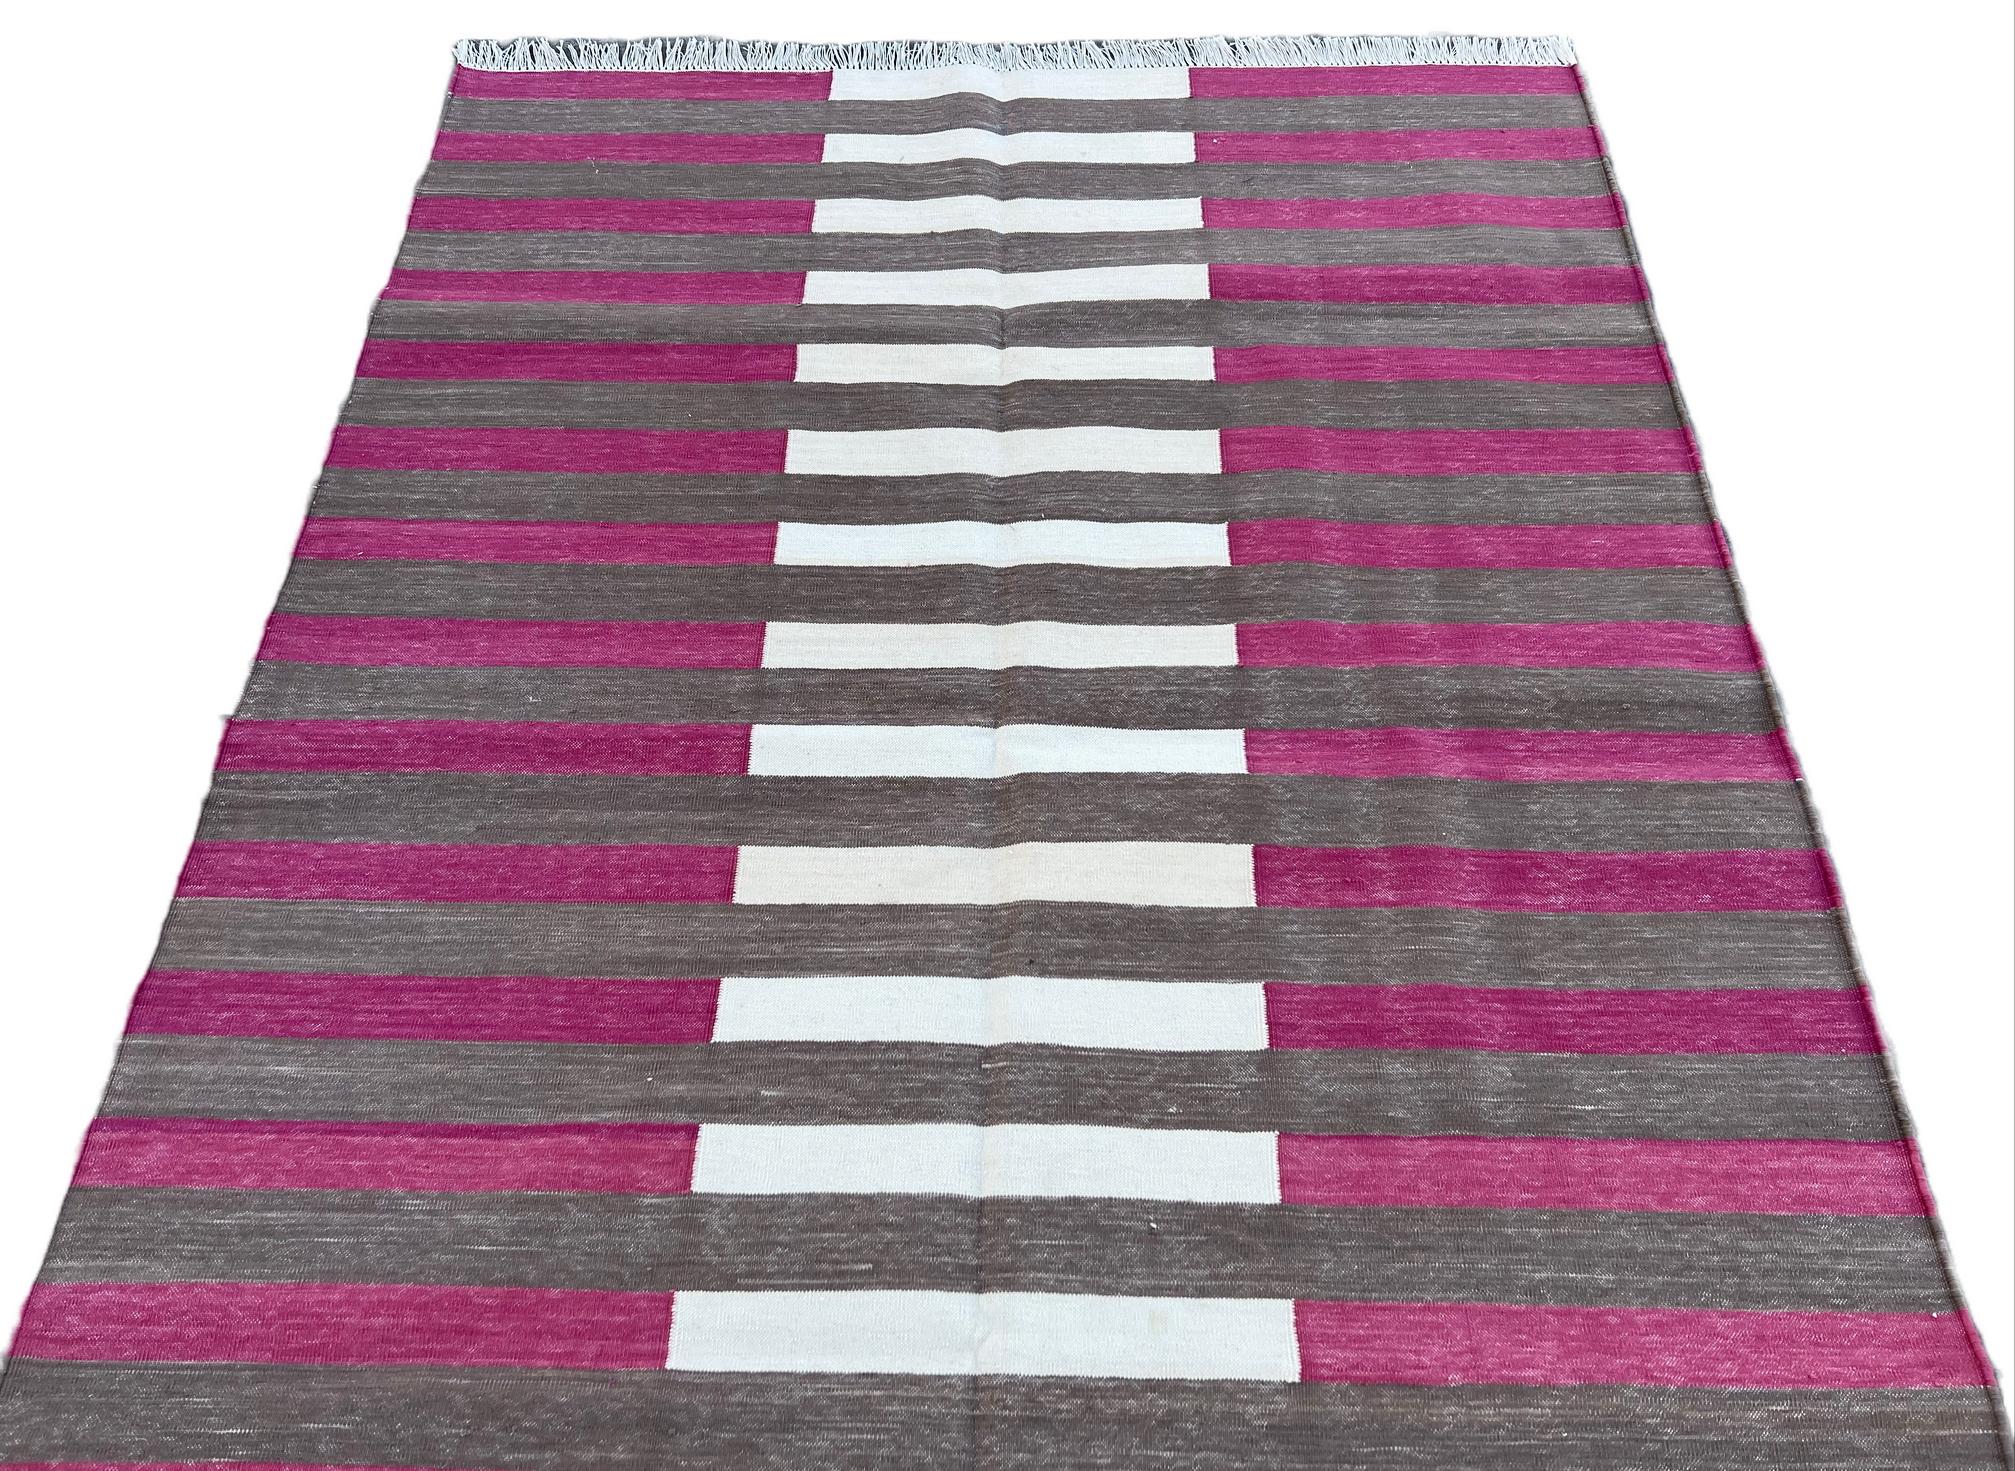 Handmade Cotton Area Flat Weave Rug, 4x6 Brown And Pink Striped Indian Dhurrie For Sale 1